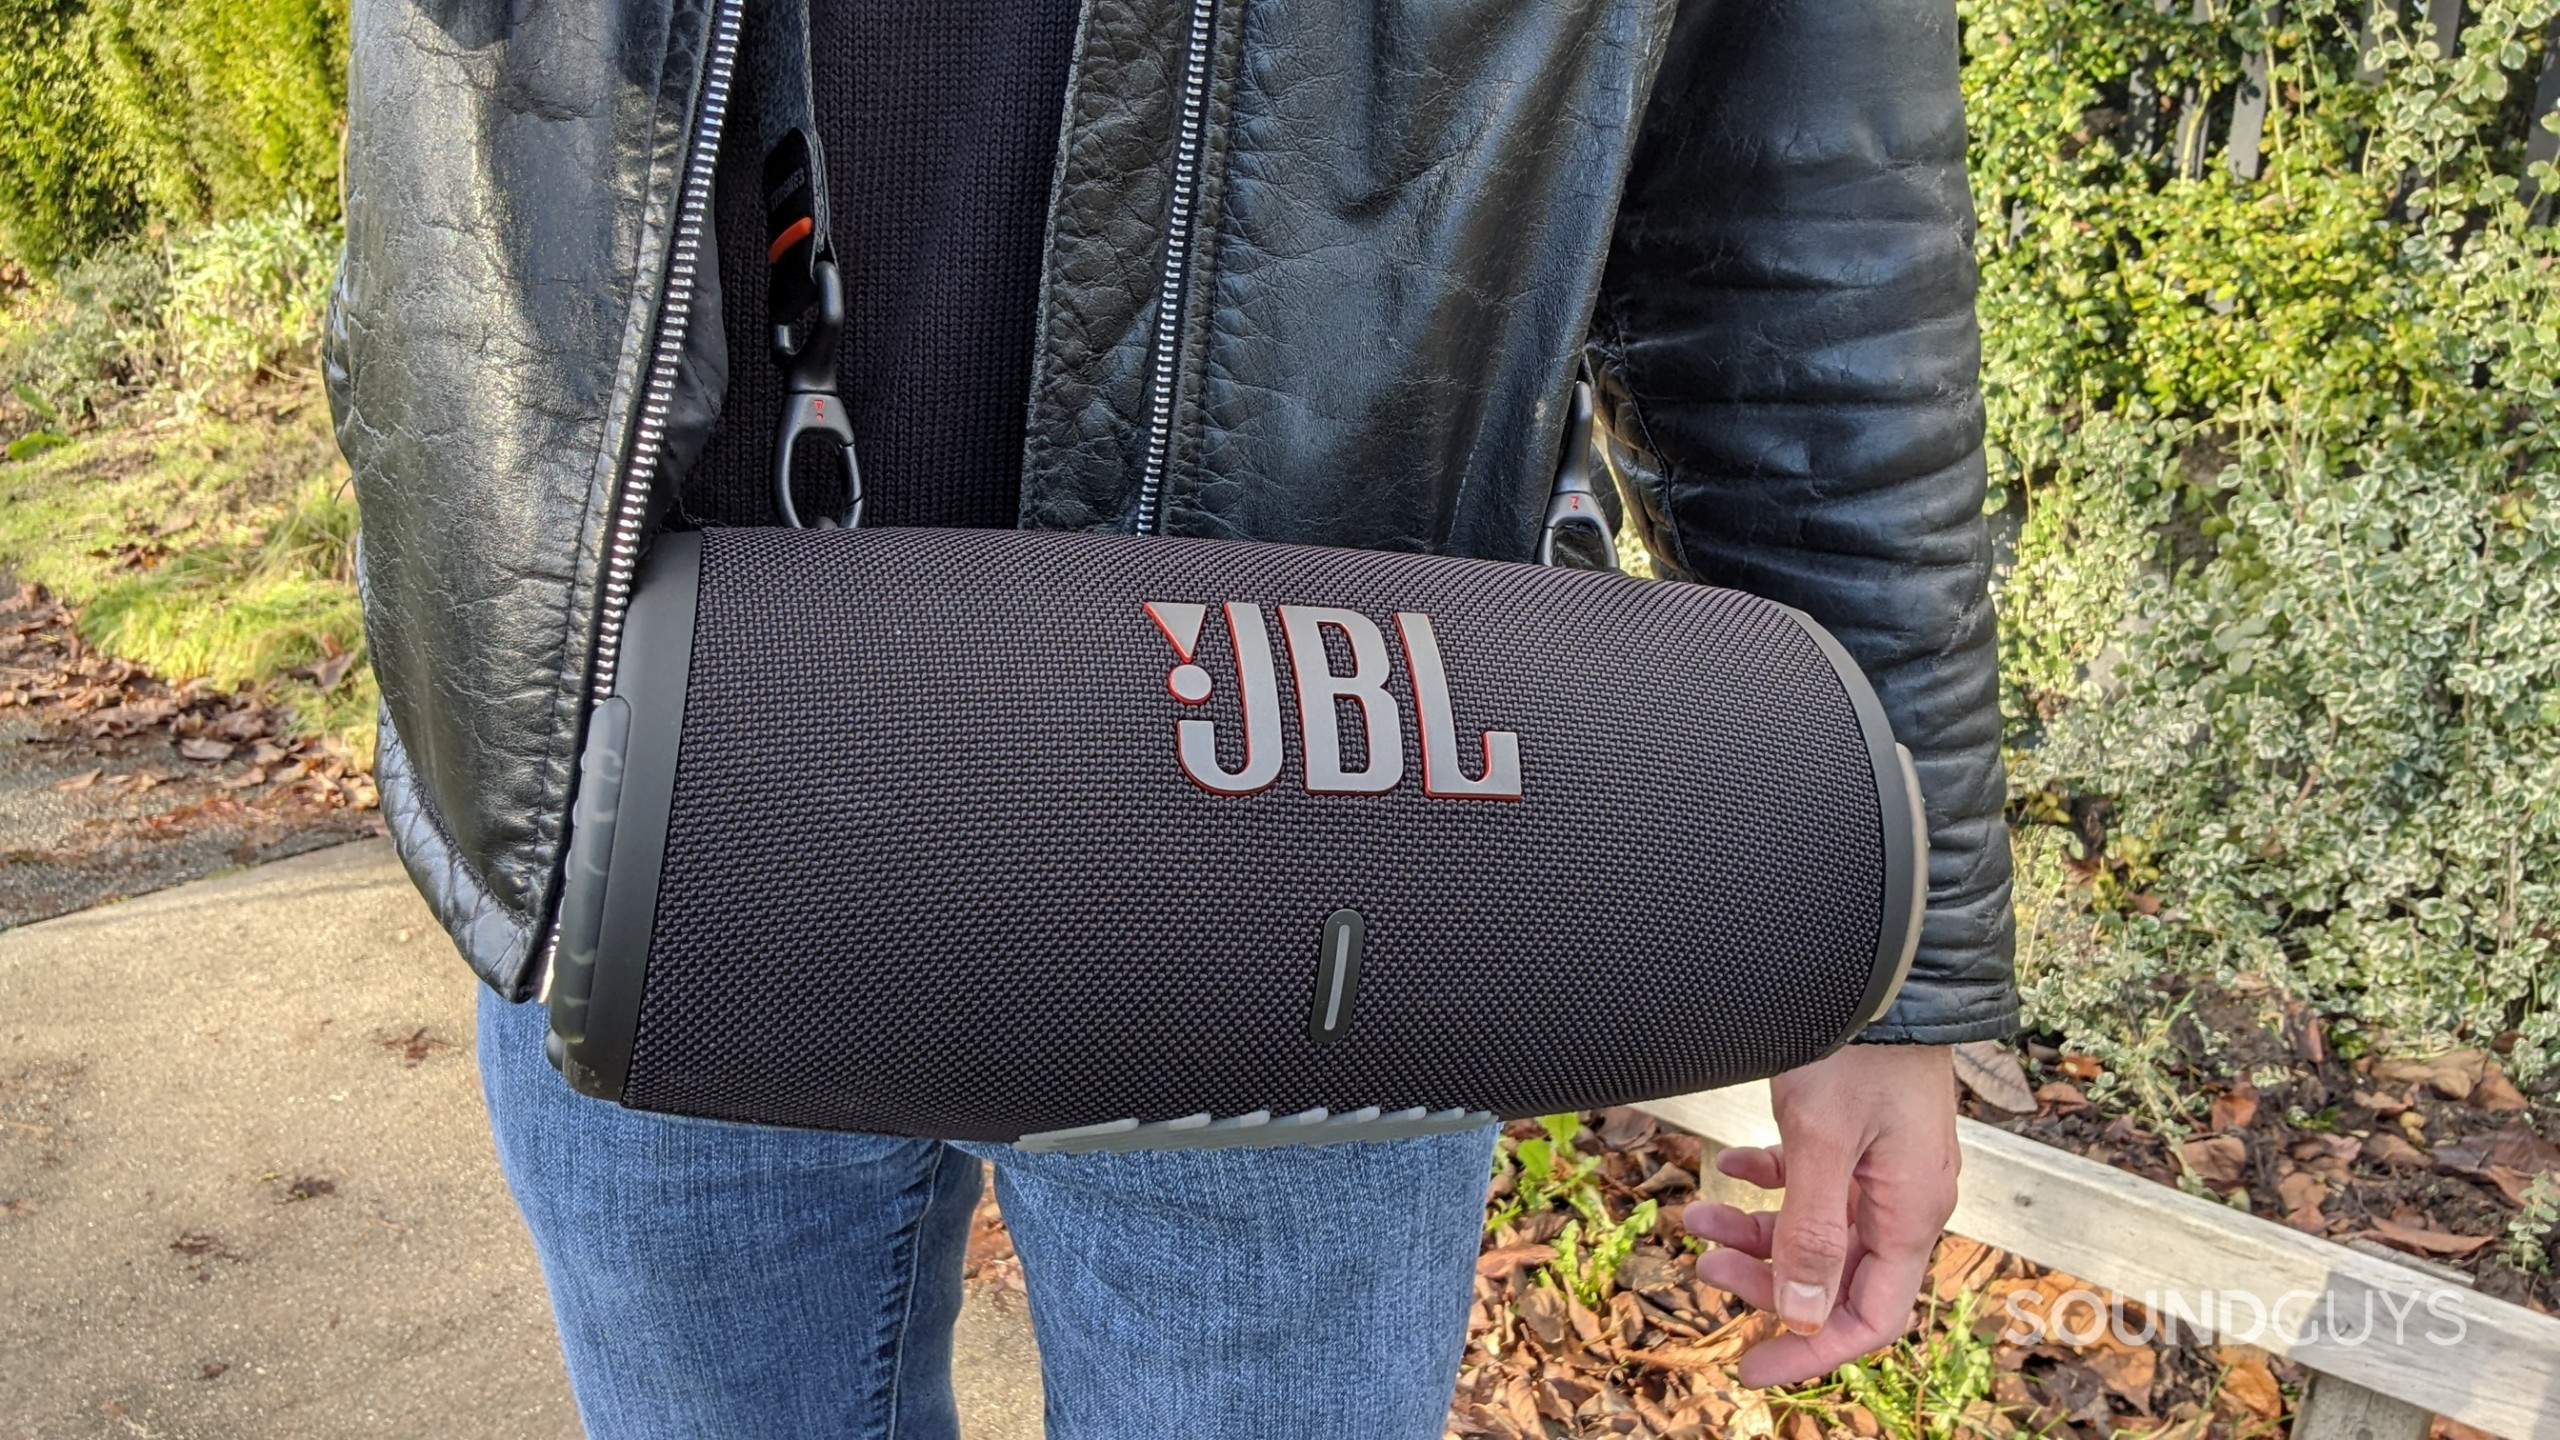 JBL Xtreme Portable Bluetooth Speaker Powerful Sound ＆ Deep Bass IP67 Waterproof Pair with Multiple Speakers Wireless Bluetooth Speaker Bun